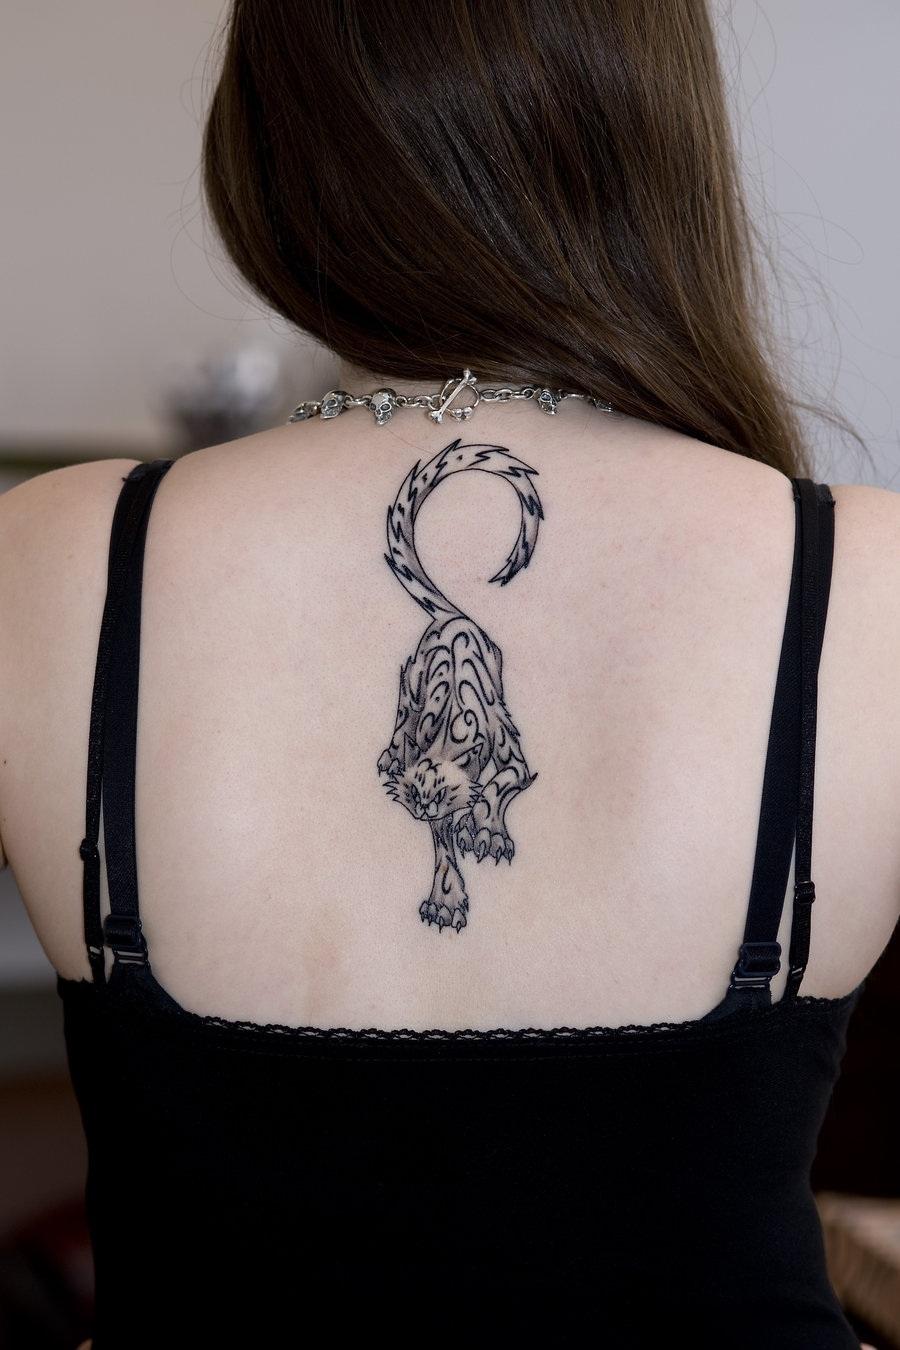 Back Tattoos For Women| Meaning| Pictures| Tattooing